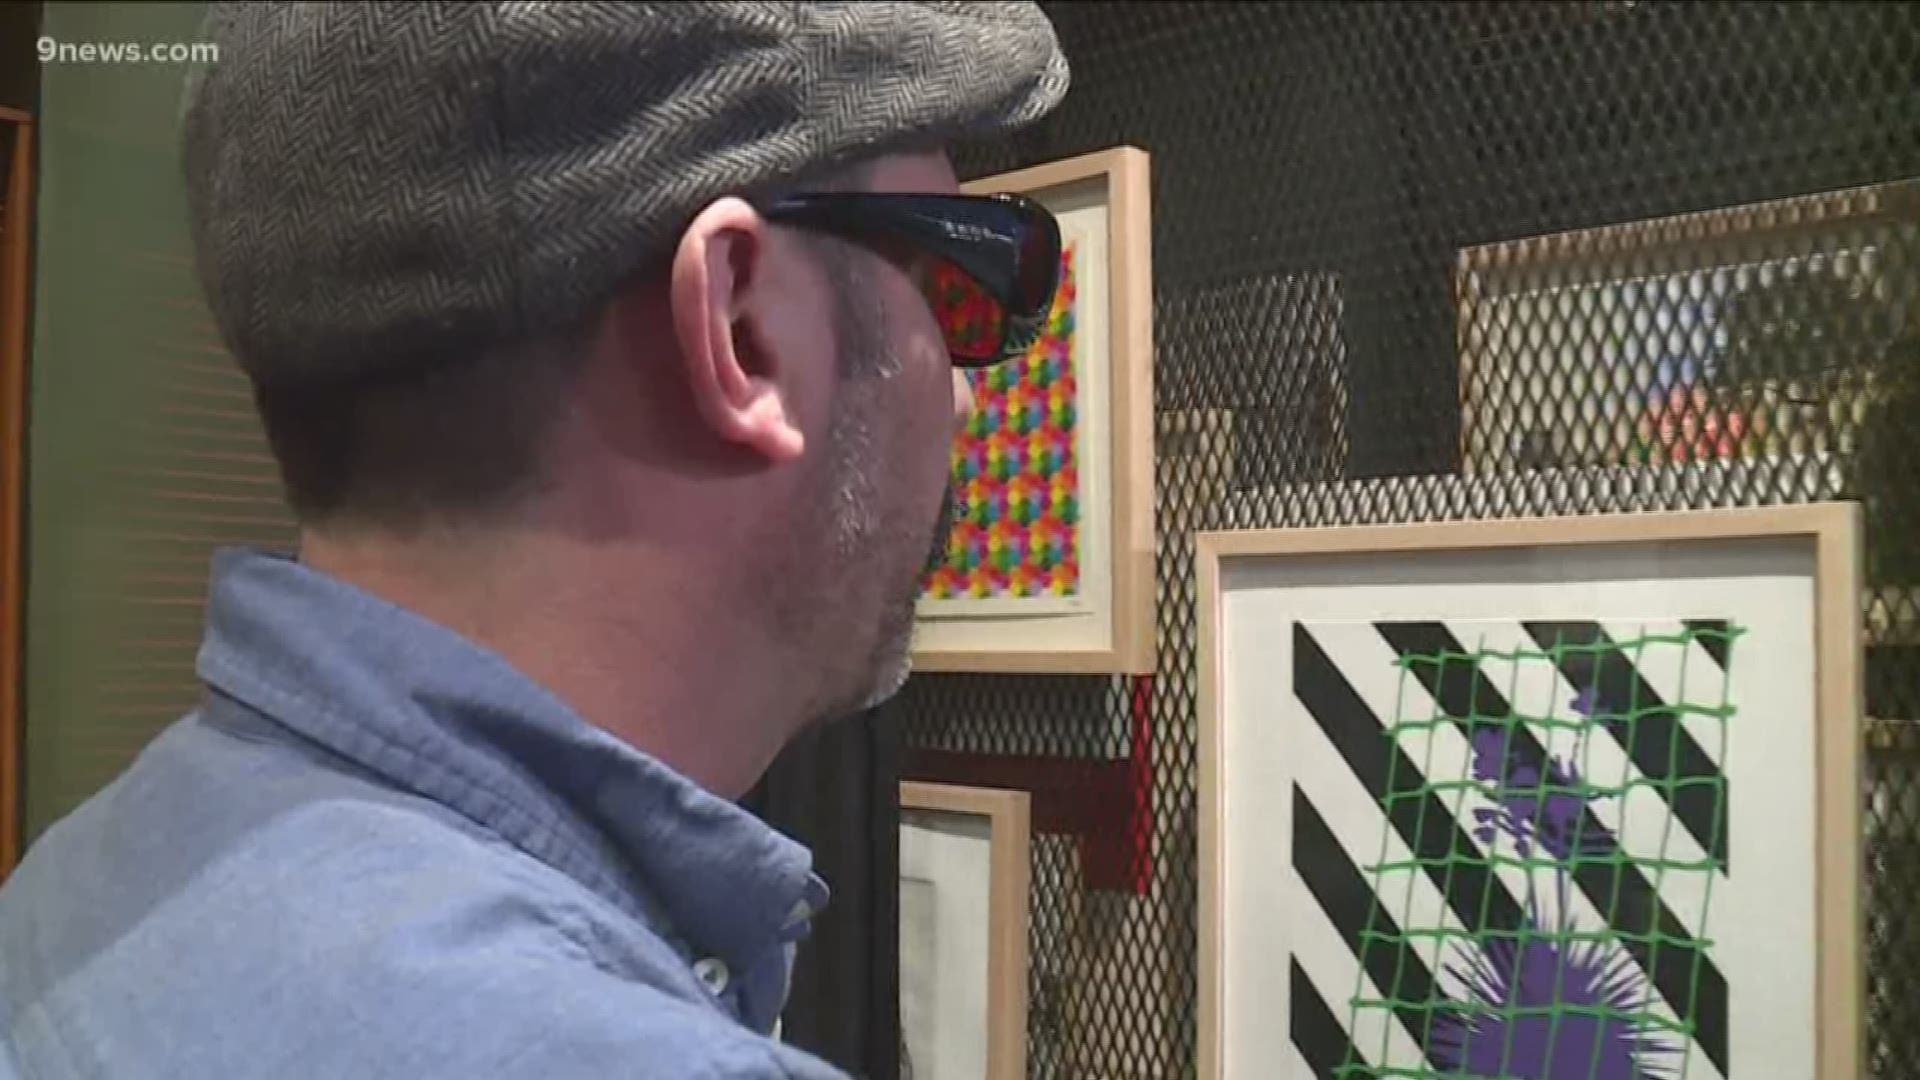 The museum will begin providing glasses to colorblind visitors starting Dec. 10.